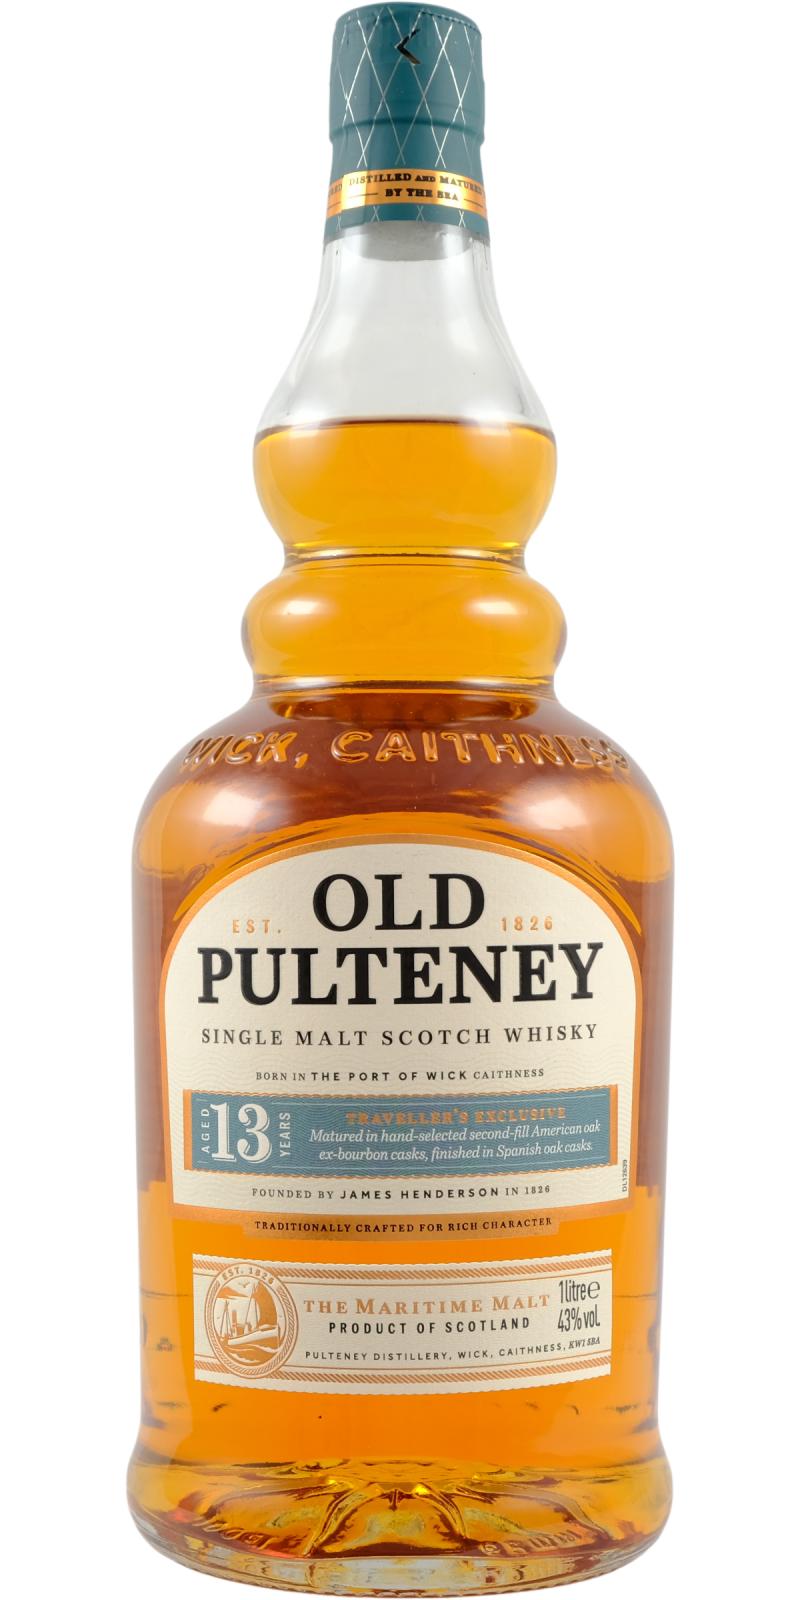 Old Pulteney 13-year-old